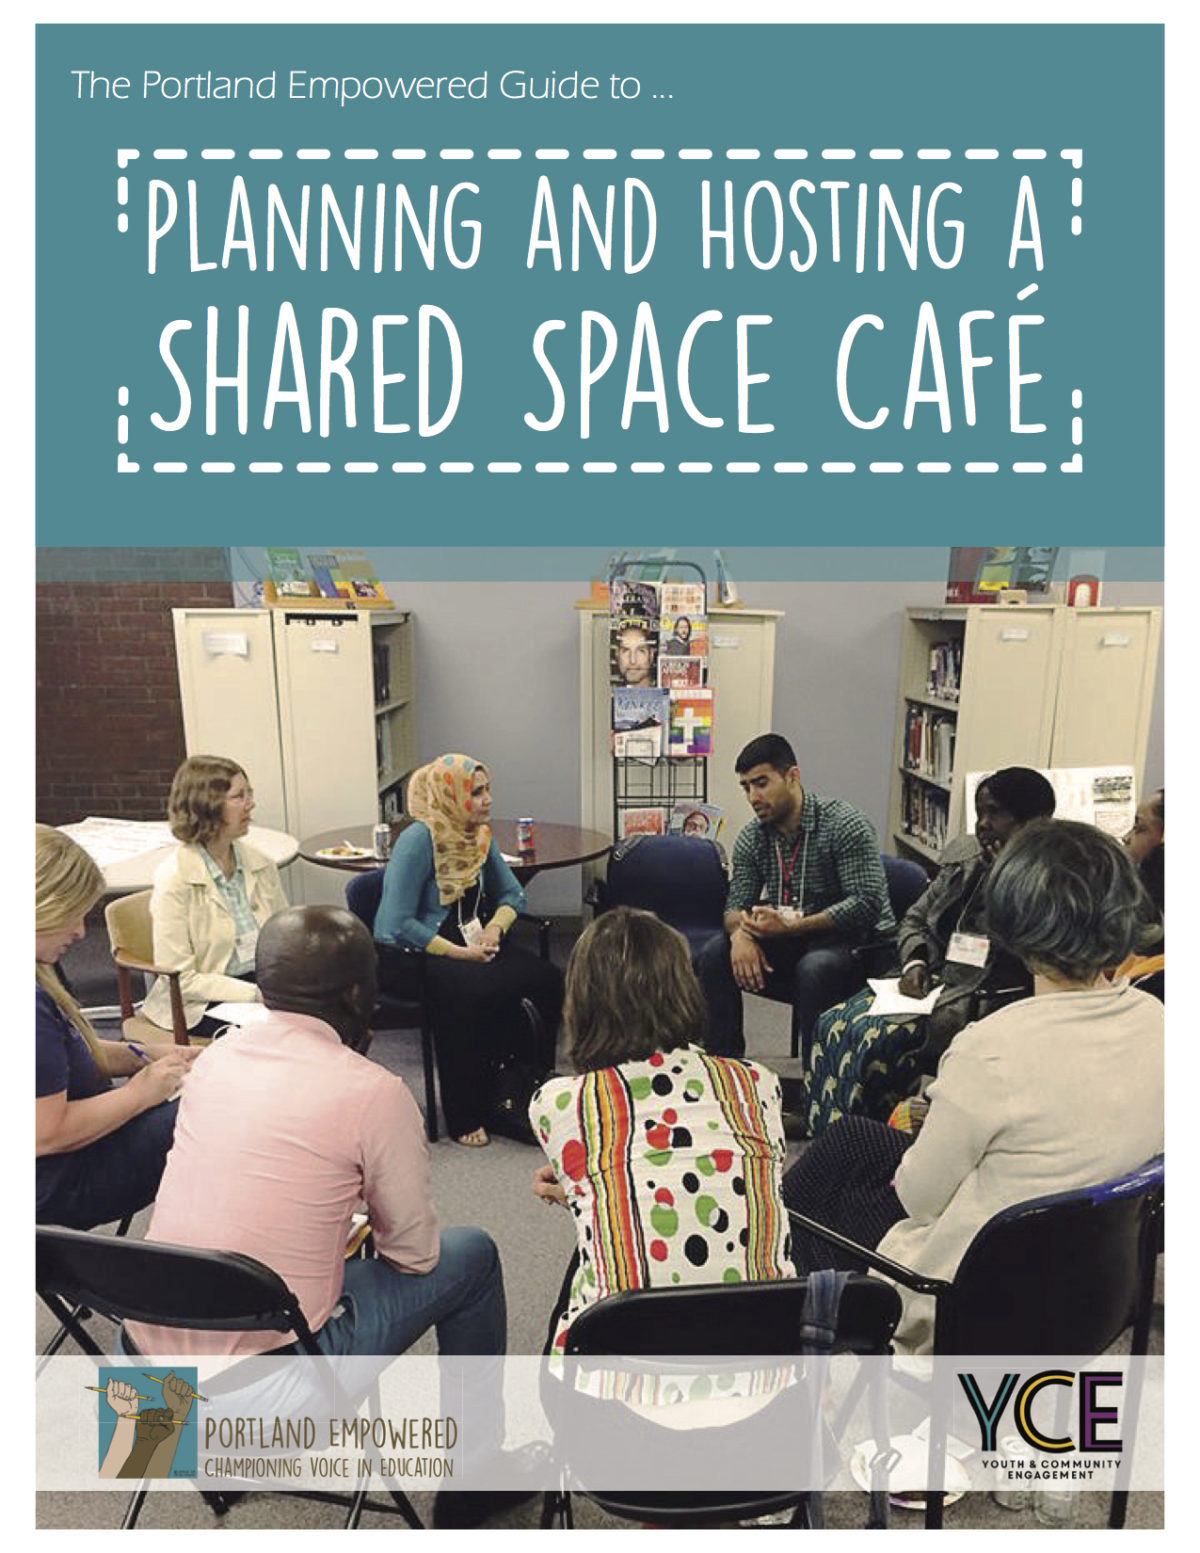 The cover image of The Portland Empowered Guide to Planning and Hosting a Shared Space Café, which describes the steps and strategies the organization uses to create inclusive and welcoming spaces for dialogue, listening, and decision-making between families and educators.